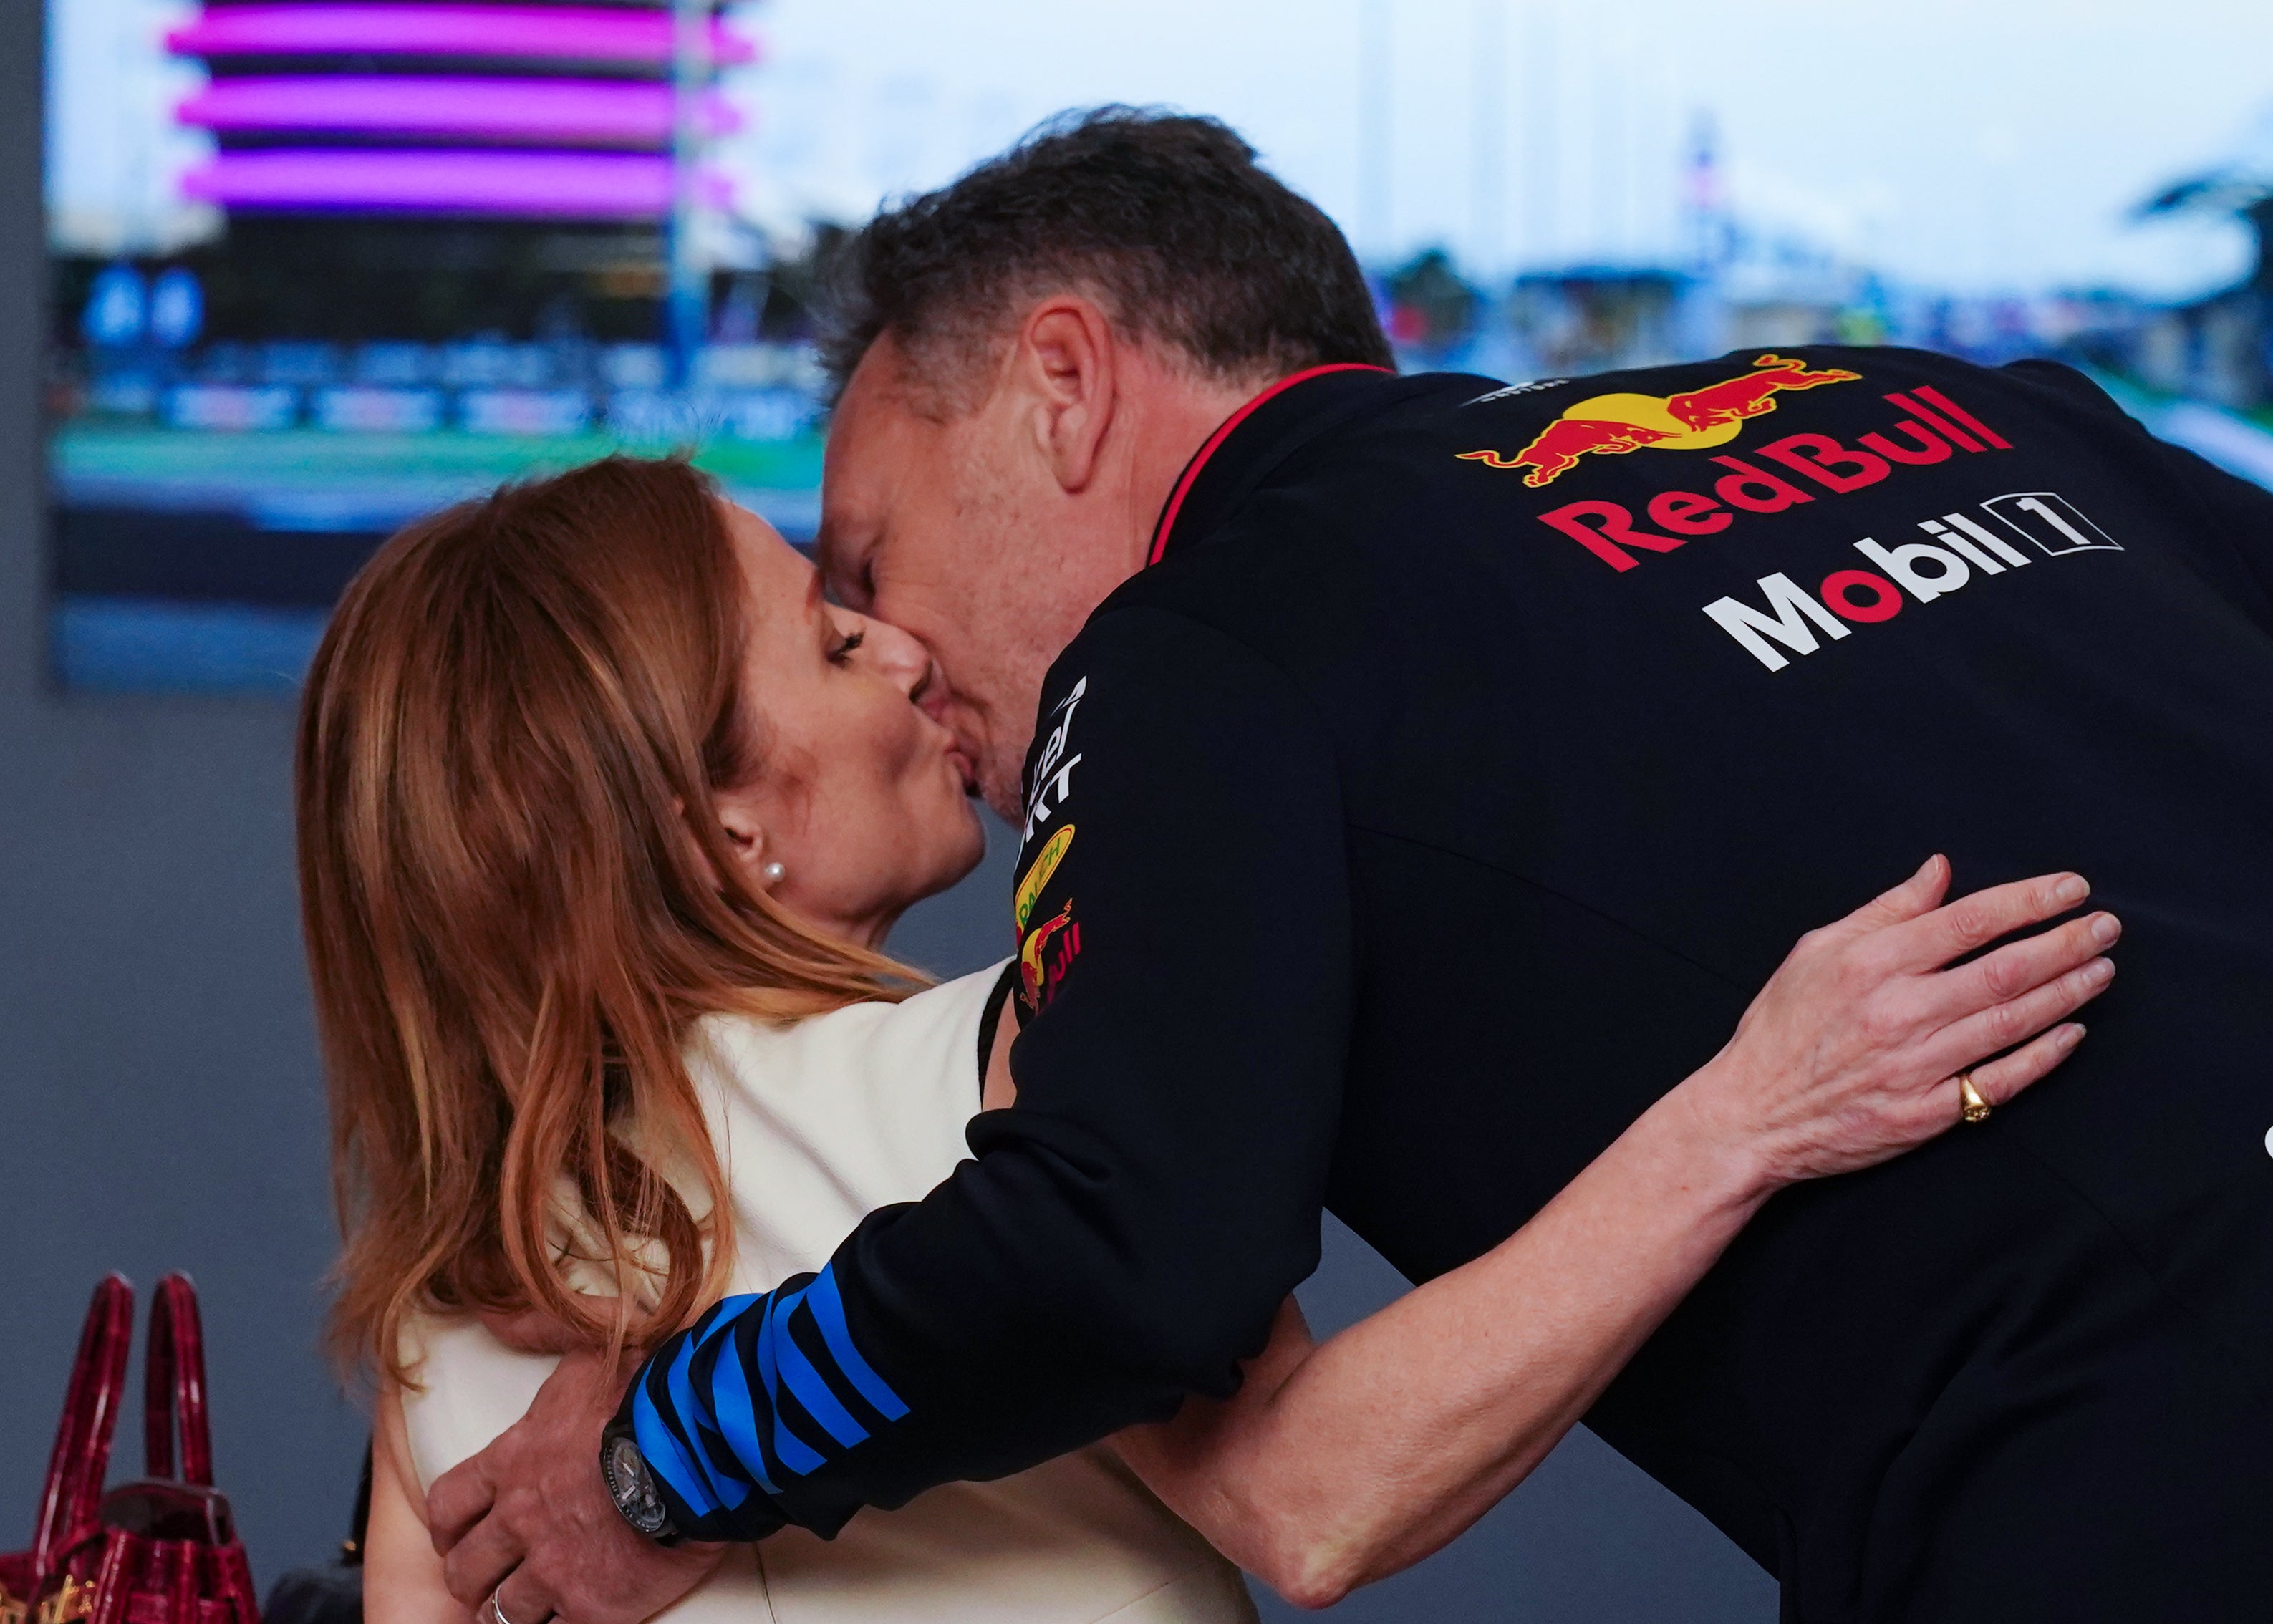 The pair shared a kiss in the Red Bull hospitality unit prior to the race